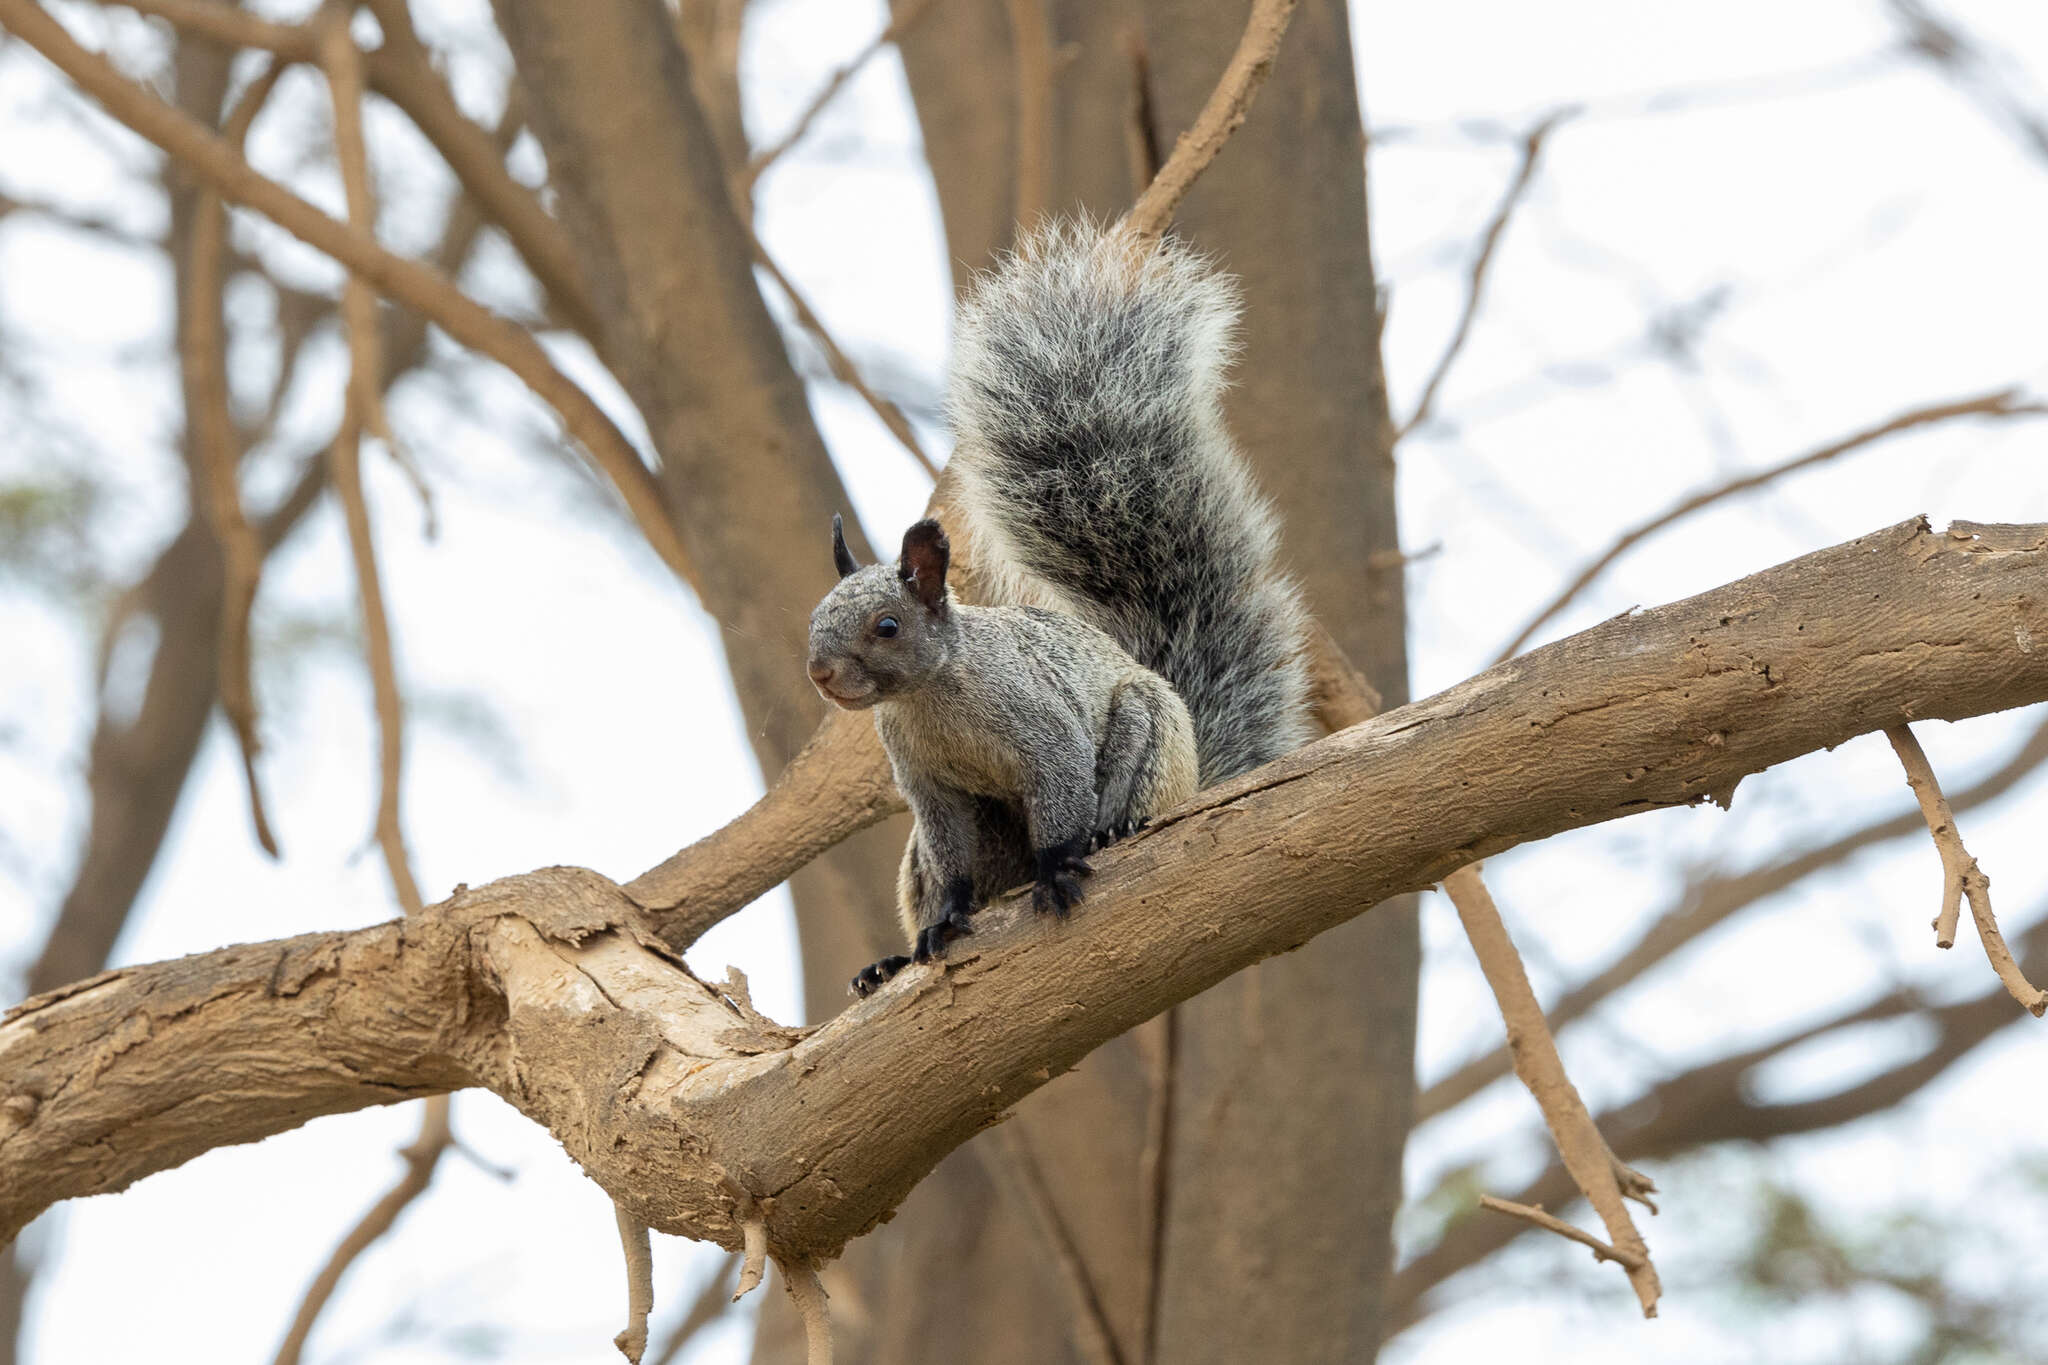 Image of Guayaquil Squirrel